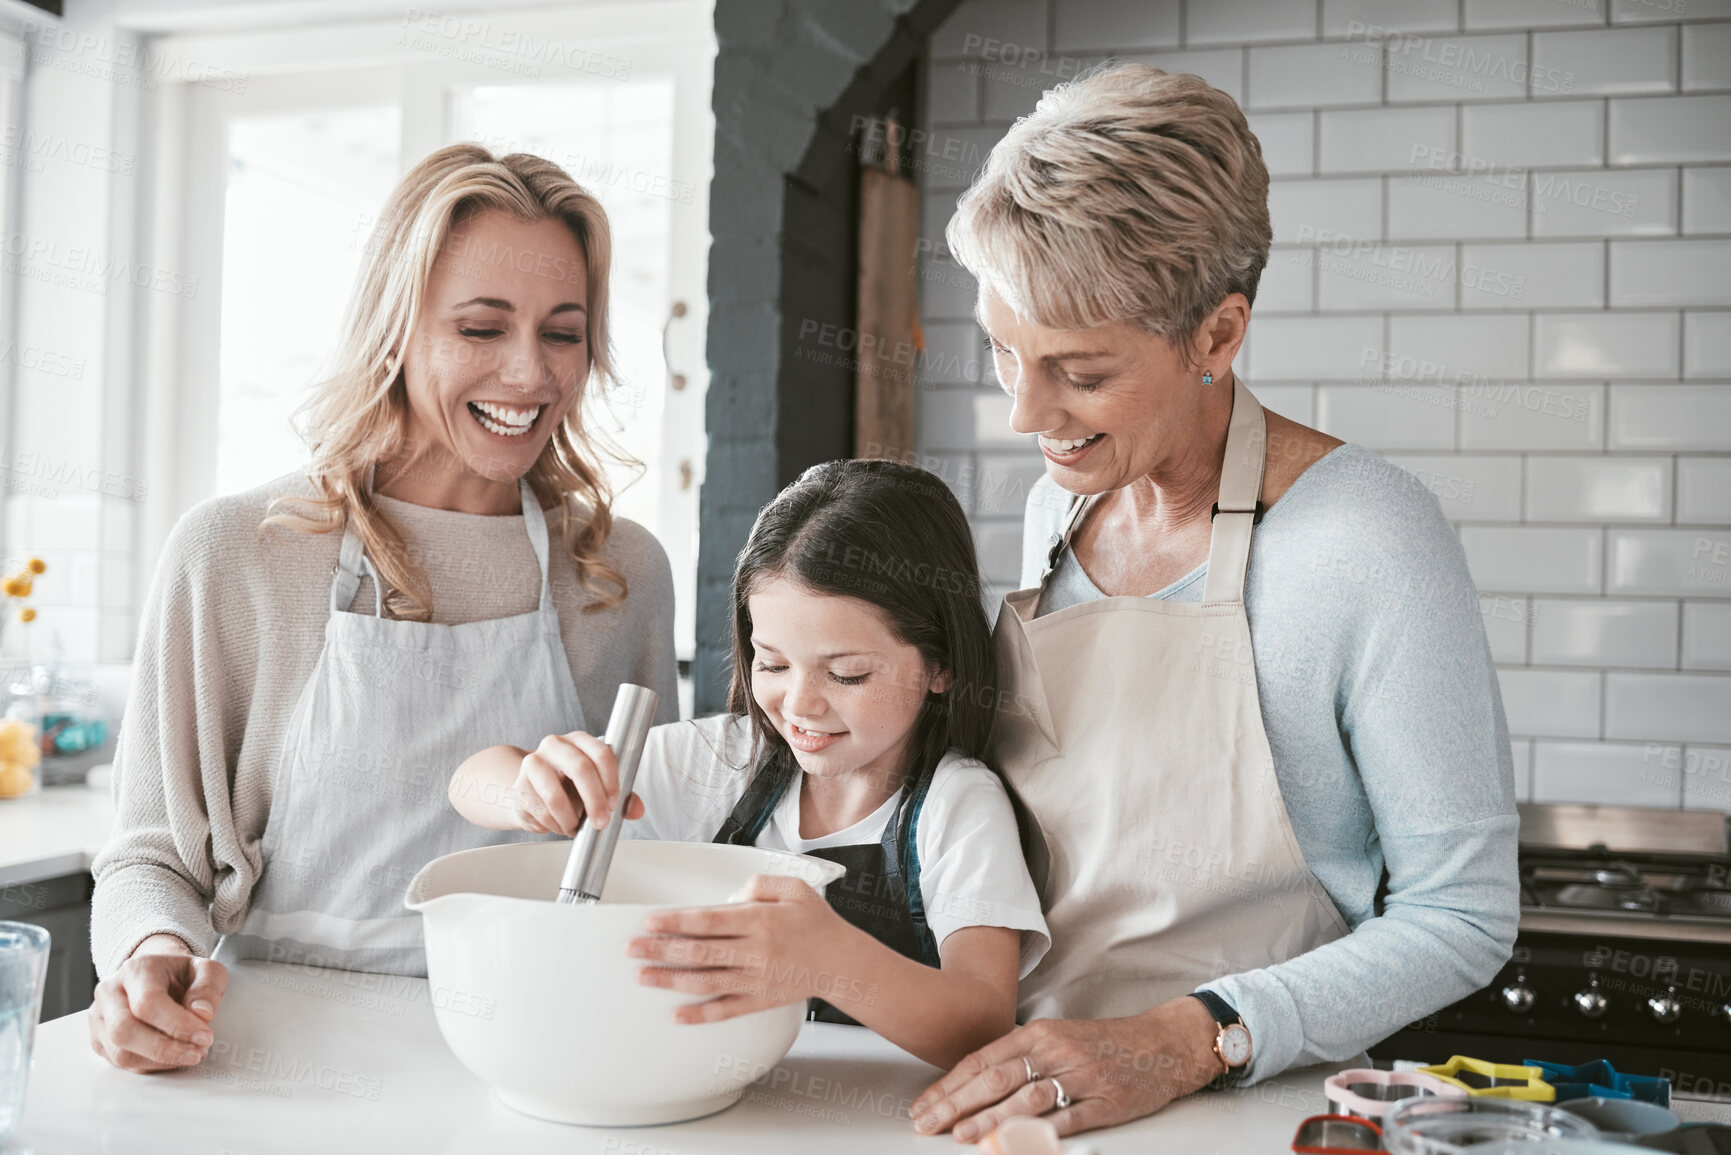 Buy stock photo Family, children and baking with a mother, grandmother and girl in the kitchen of their home together. Food, kids and bake with a woman, parent and female child learning about cooking while bonding